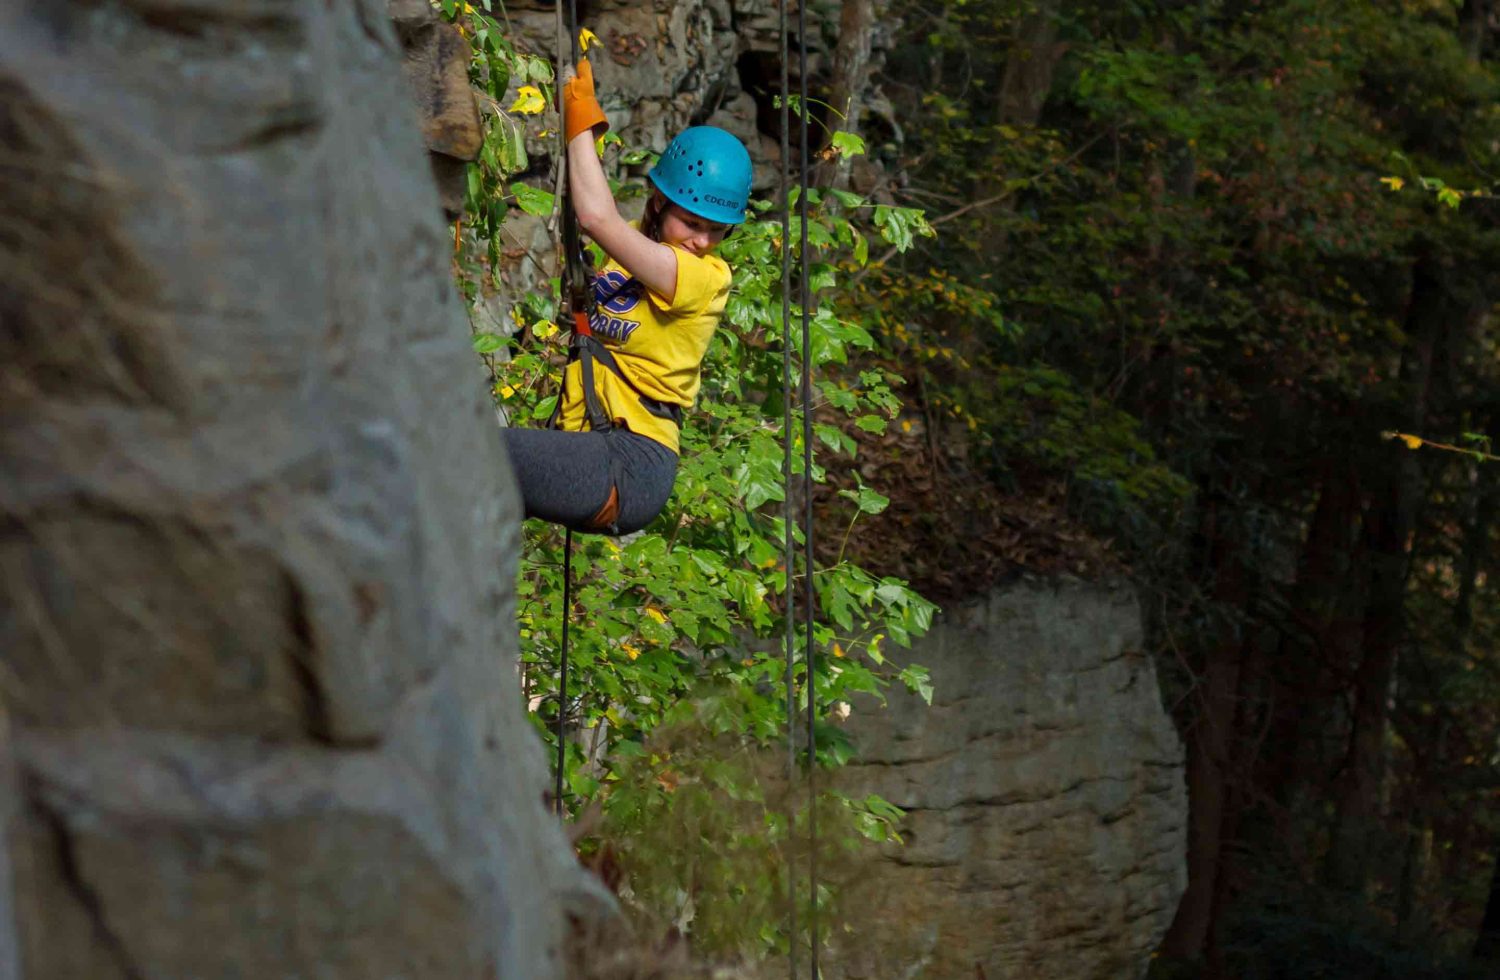 Ace Upper New Climbing and Rappelling Trip